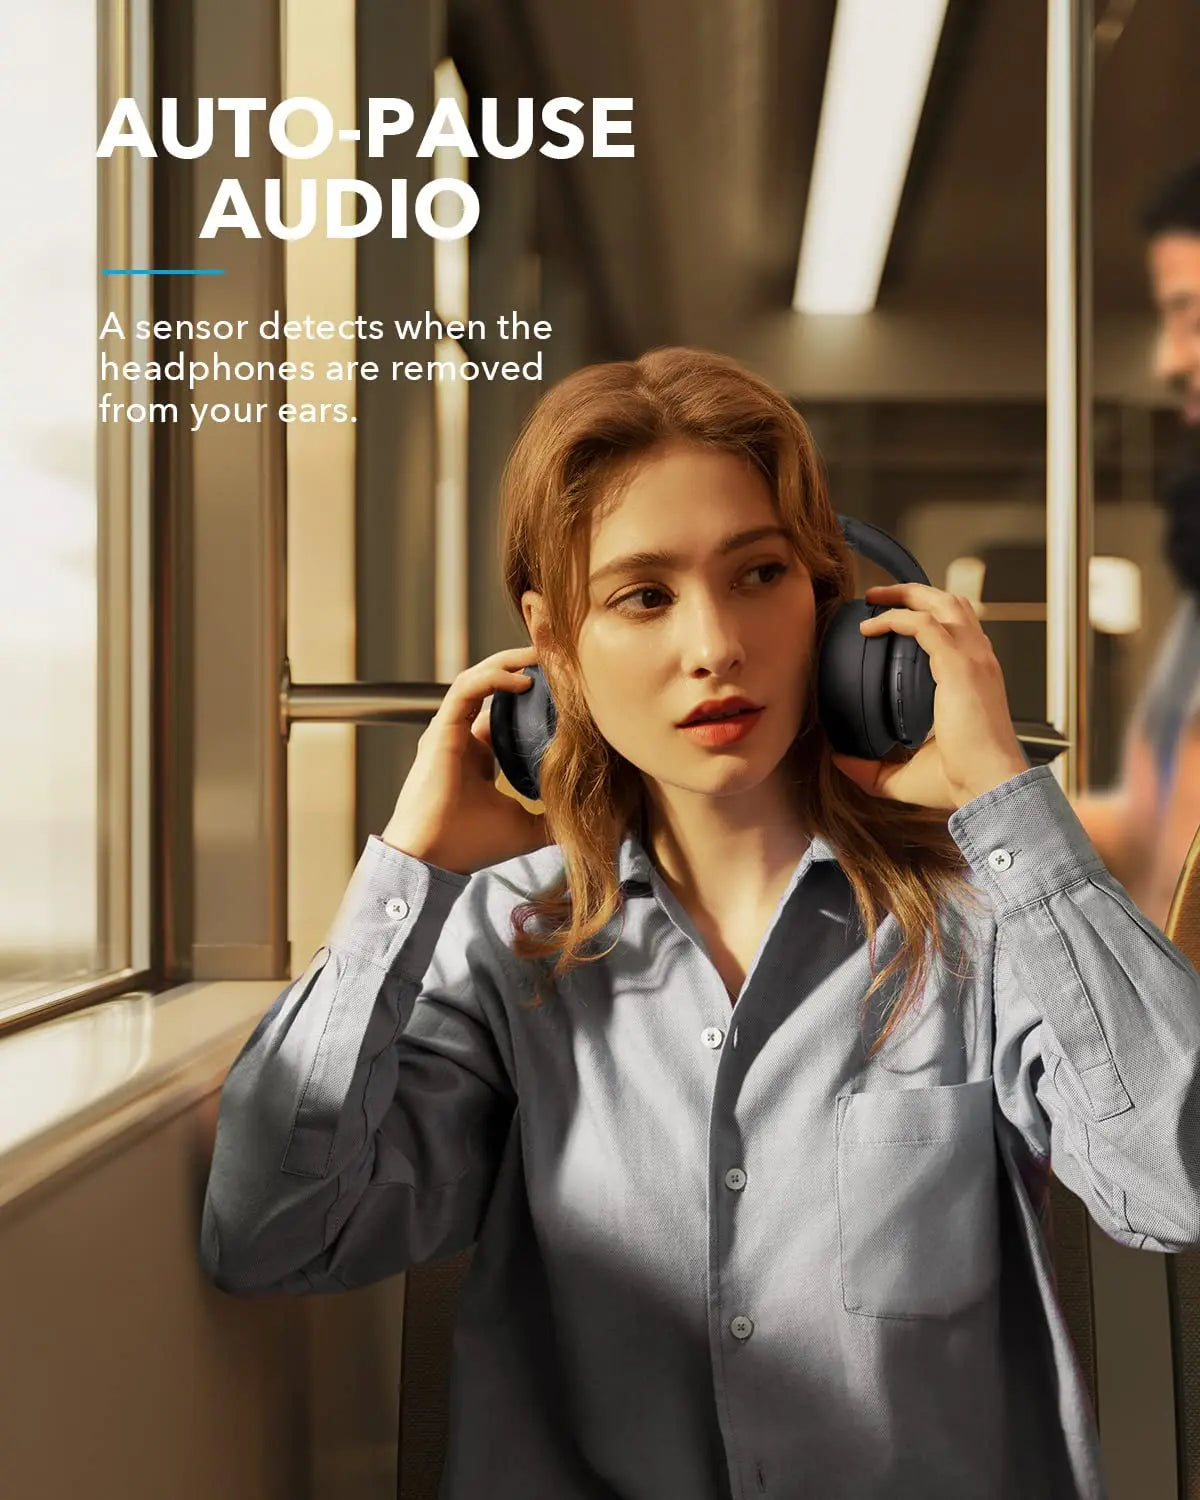 Soundcore by Anker Life Q35 Multi Mode Active Noise Cancelling wireless bluetooth Headphones, Hi-Res, 40H Playtime, Clear Calls